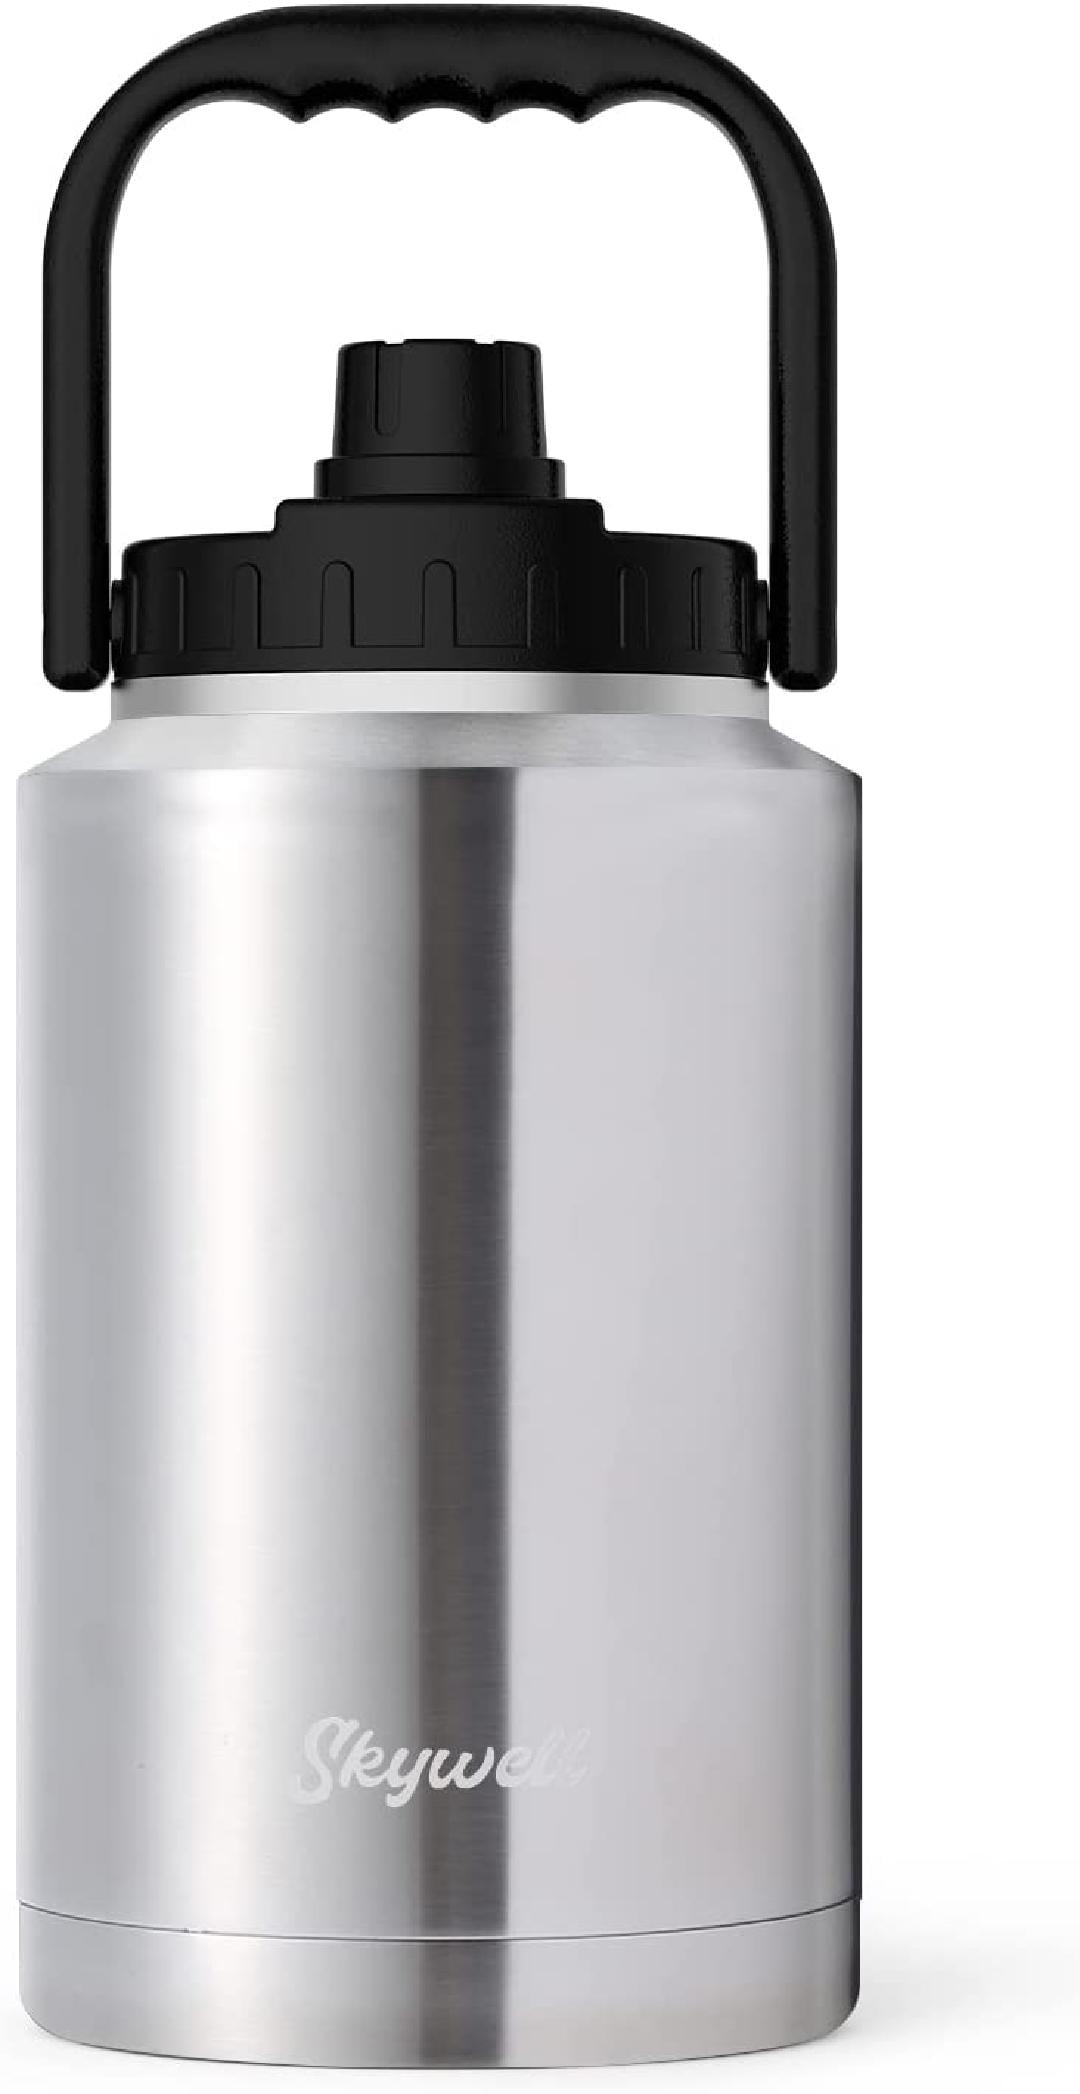 GOBATT 128 oz Stainless Steel Double Walled Insulated Water Bottle,One  Gallon large Hot & Cold Drinks Thermoses, Jug With Handle for Sports